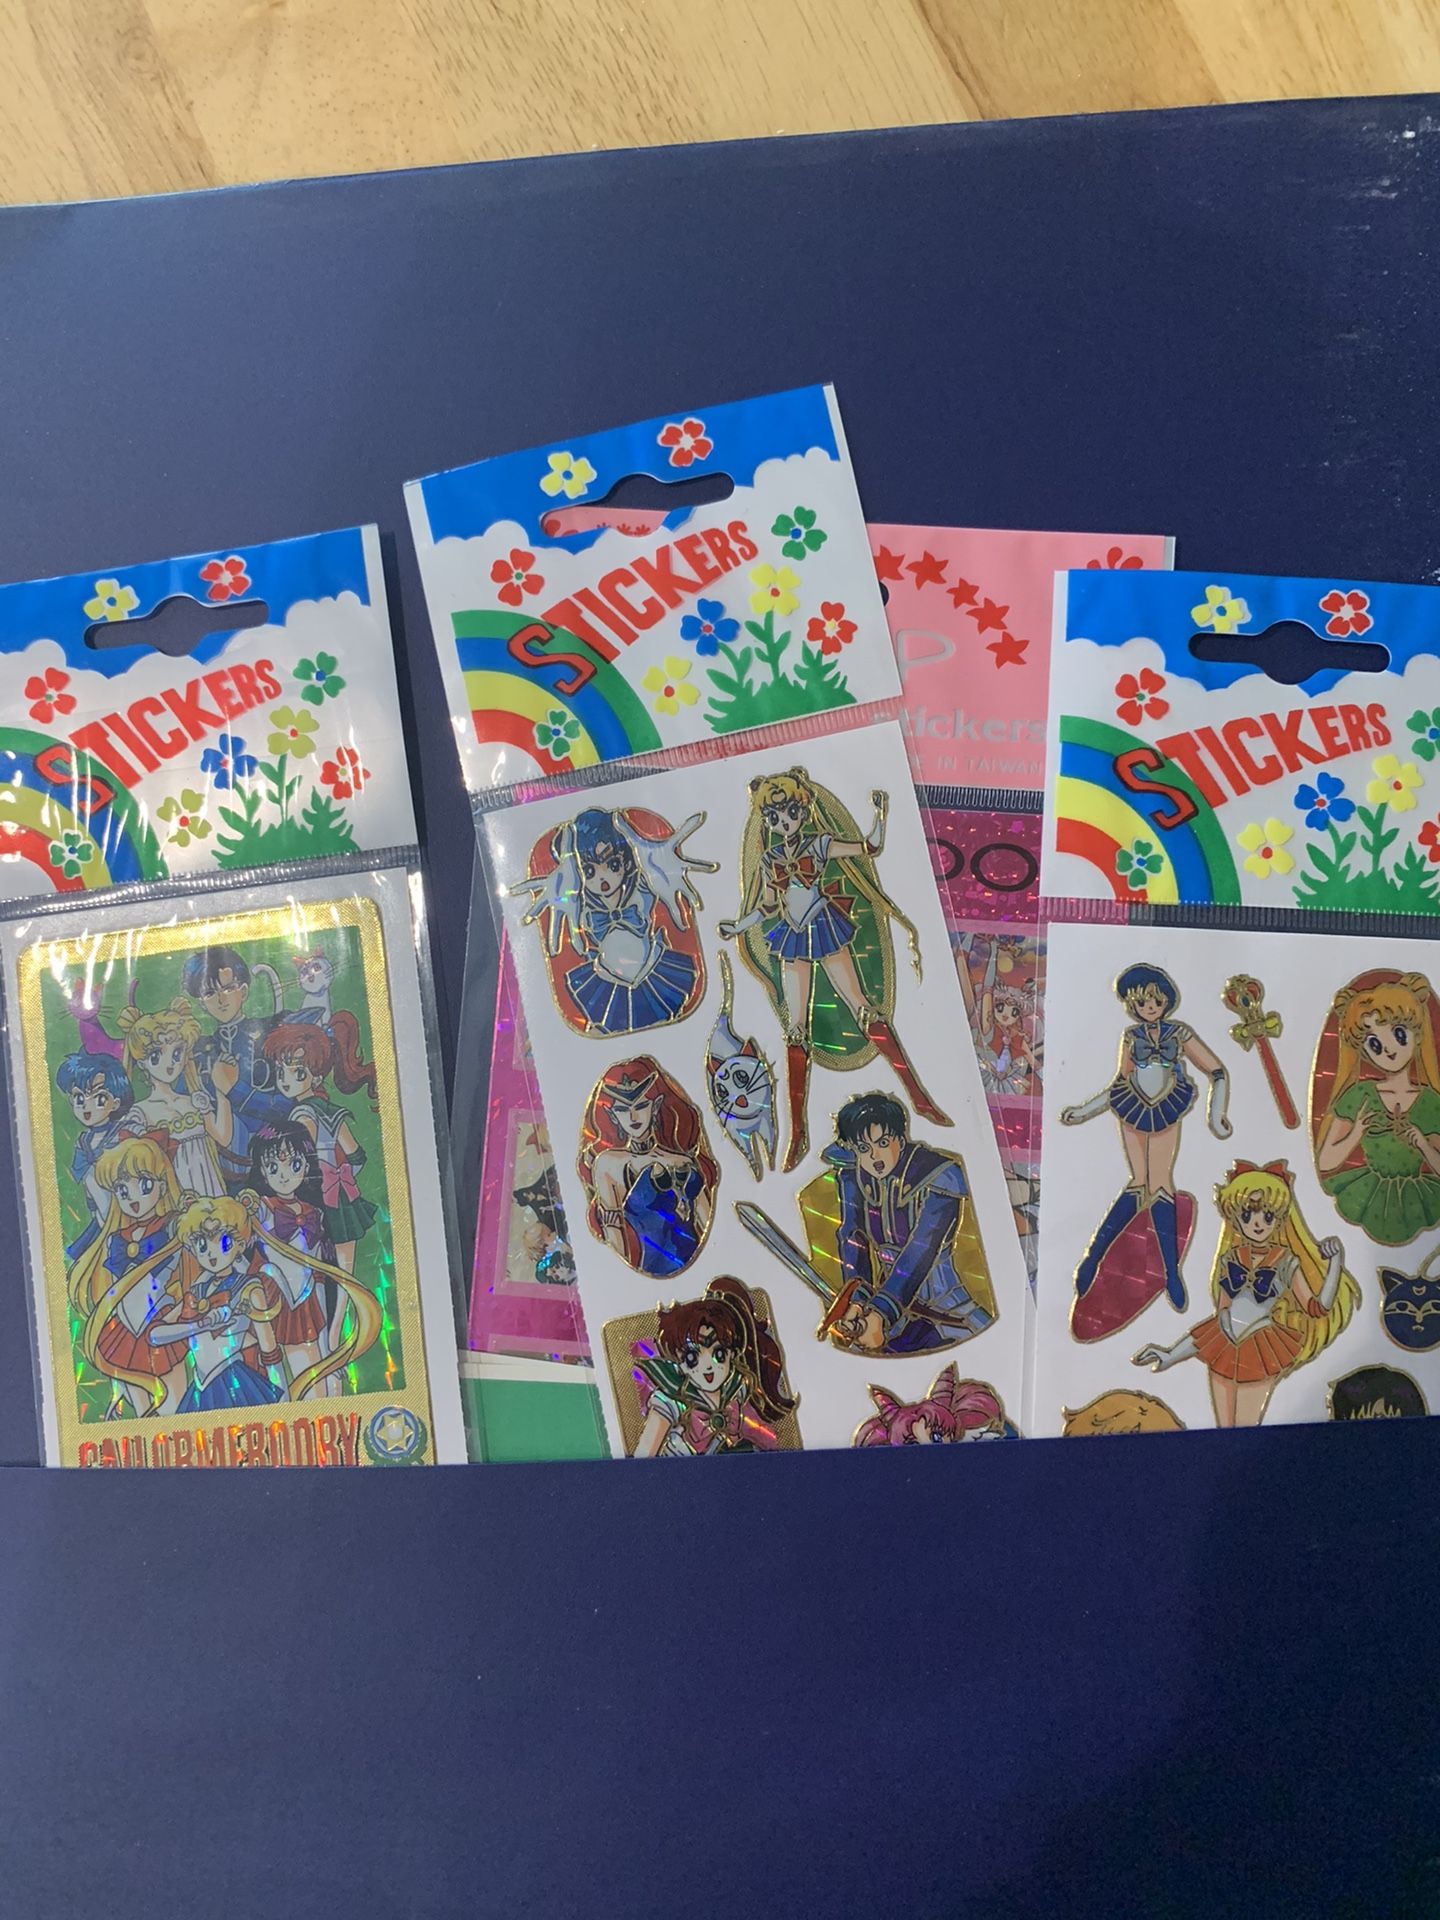 Sailor moon trading cards